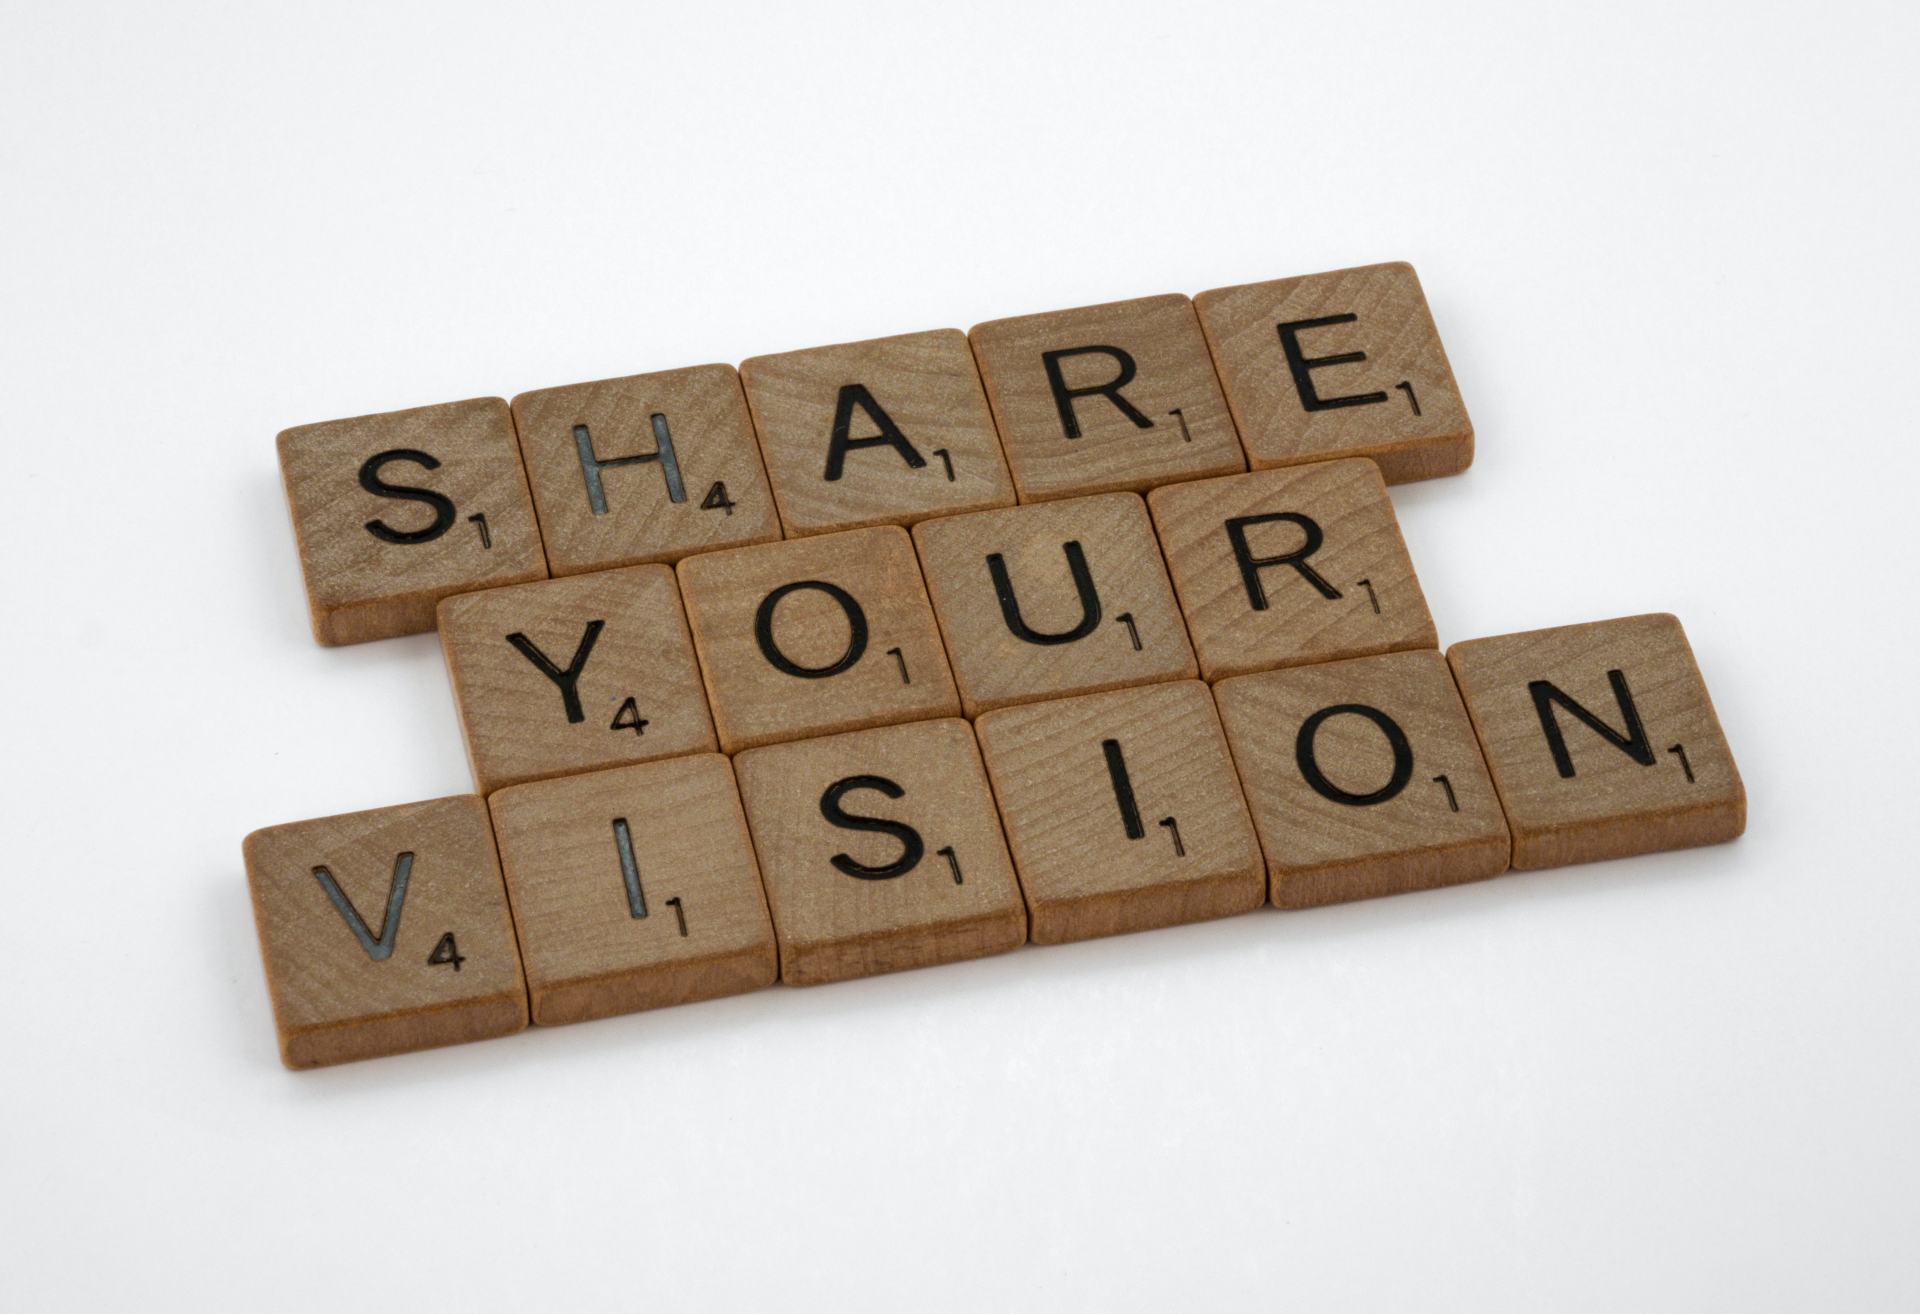 Share your vision